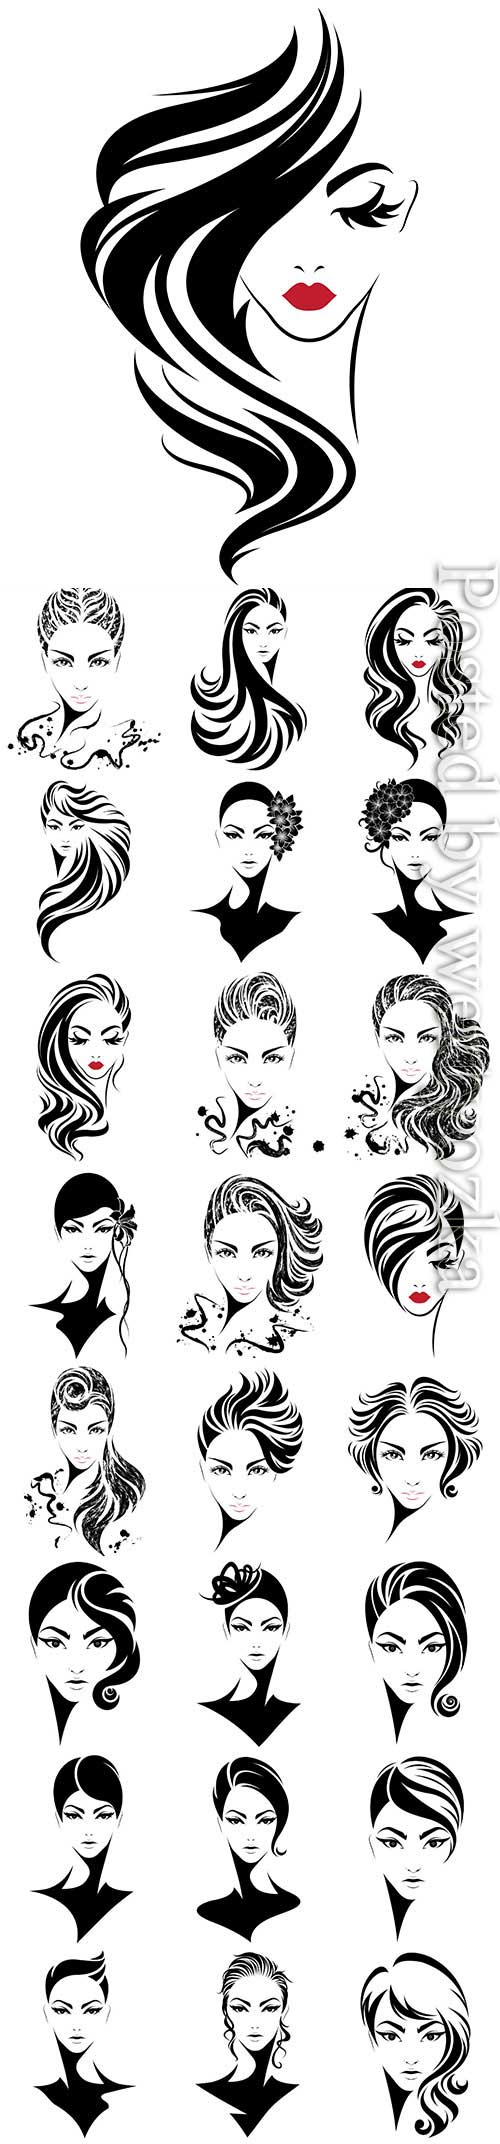 Girls with different hairstyles in vector